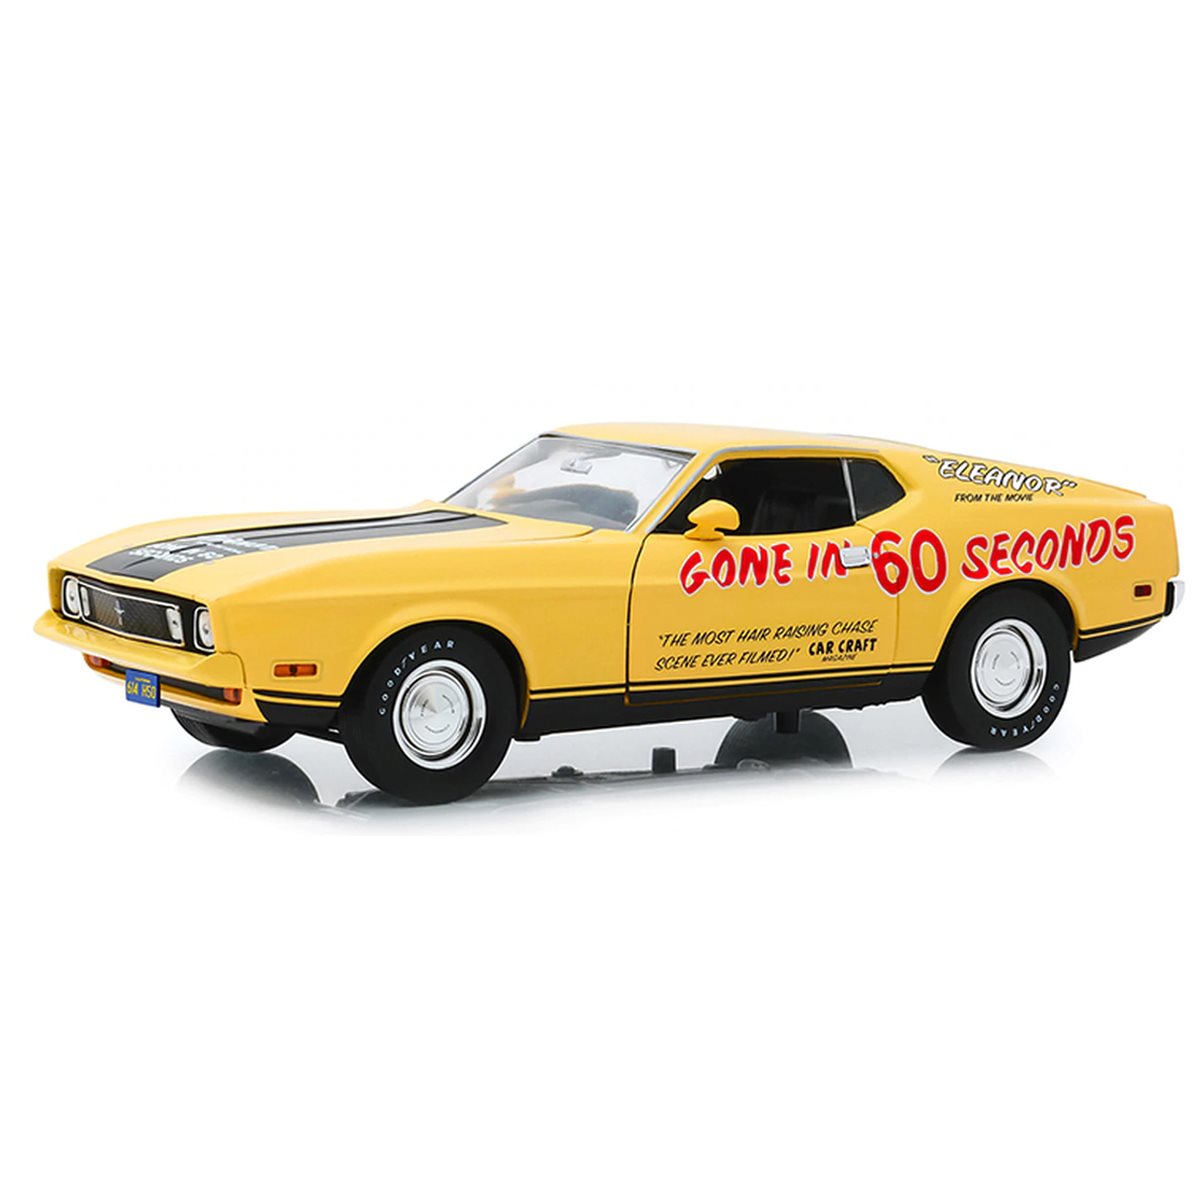 1973 Ford Mustang Mach 1 Eleanor 1973 Greenlight 1/43 "Gone in 60 seconds" 